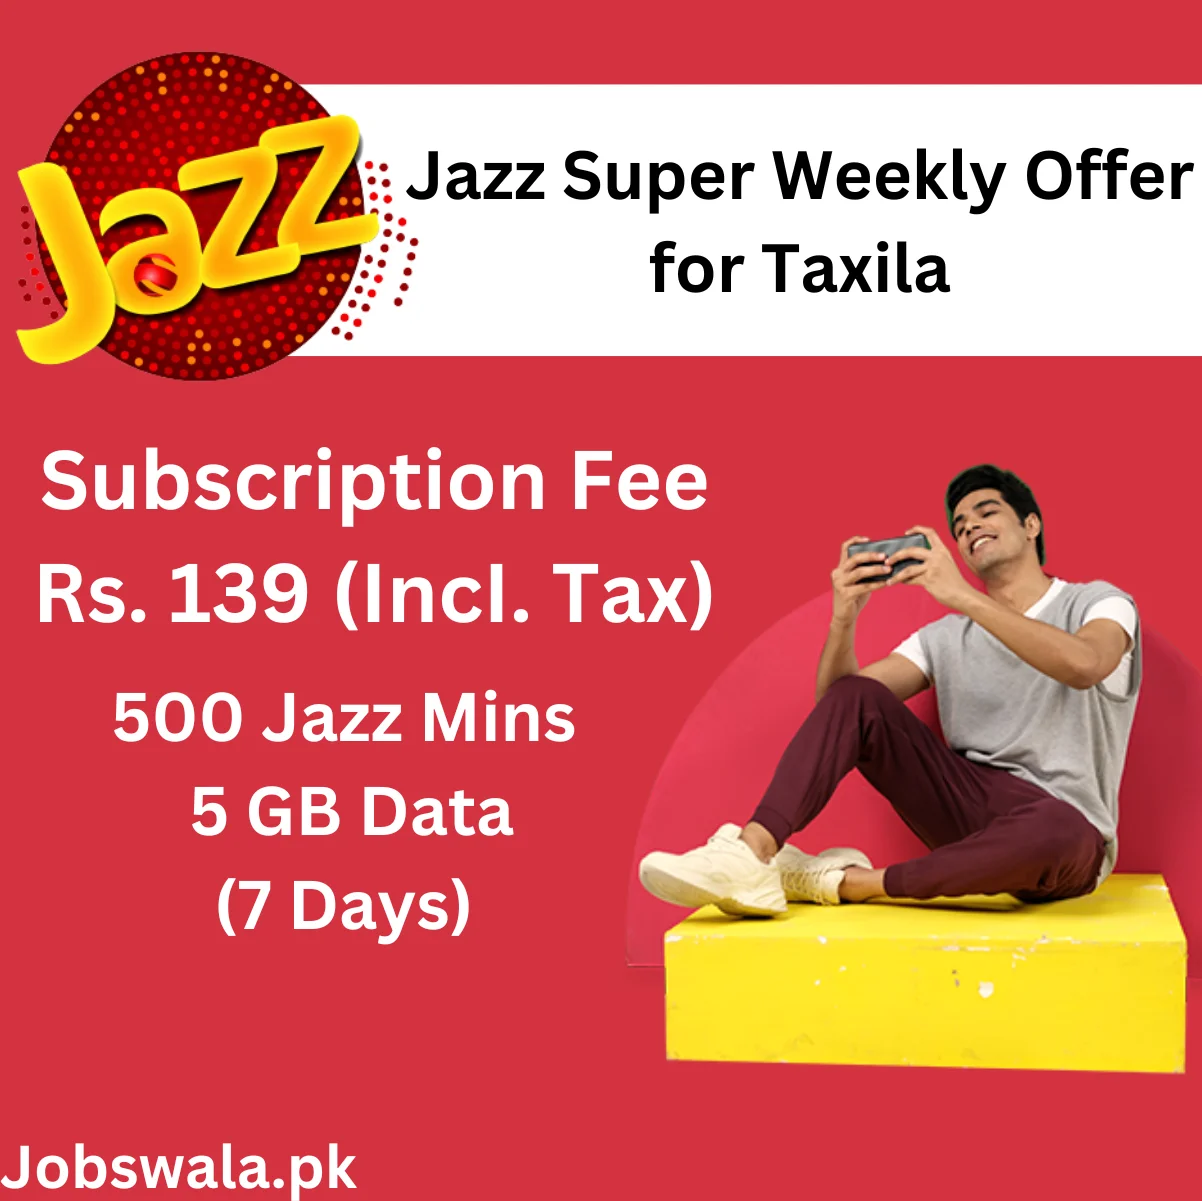 Jazz Super Weekly Offer for Taxila